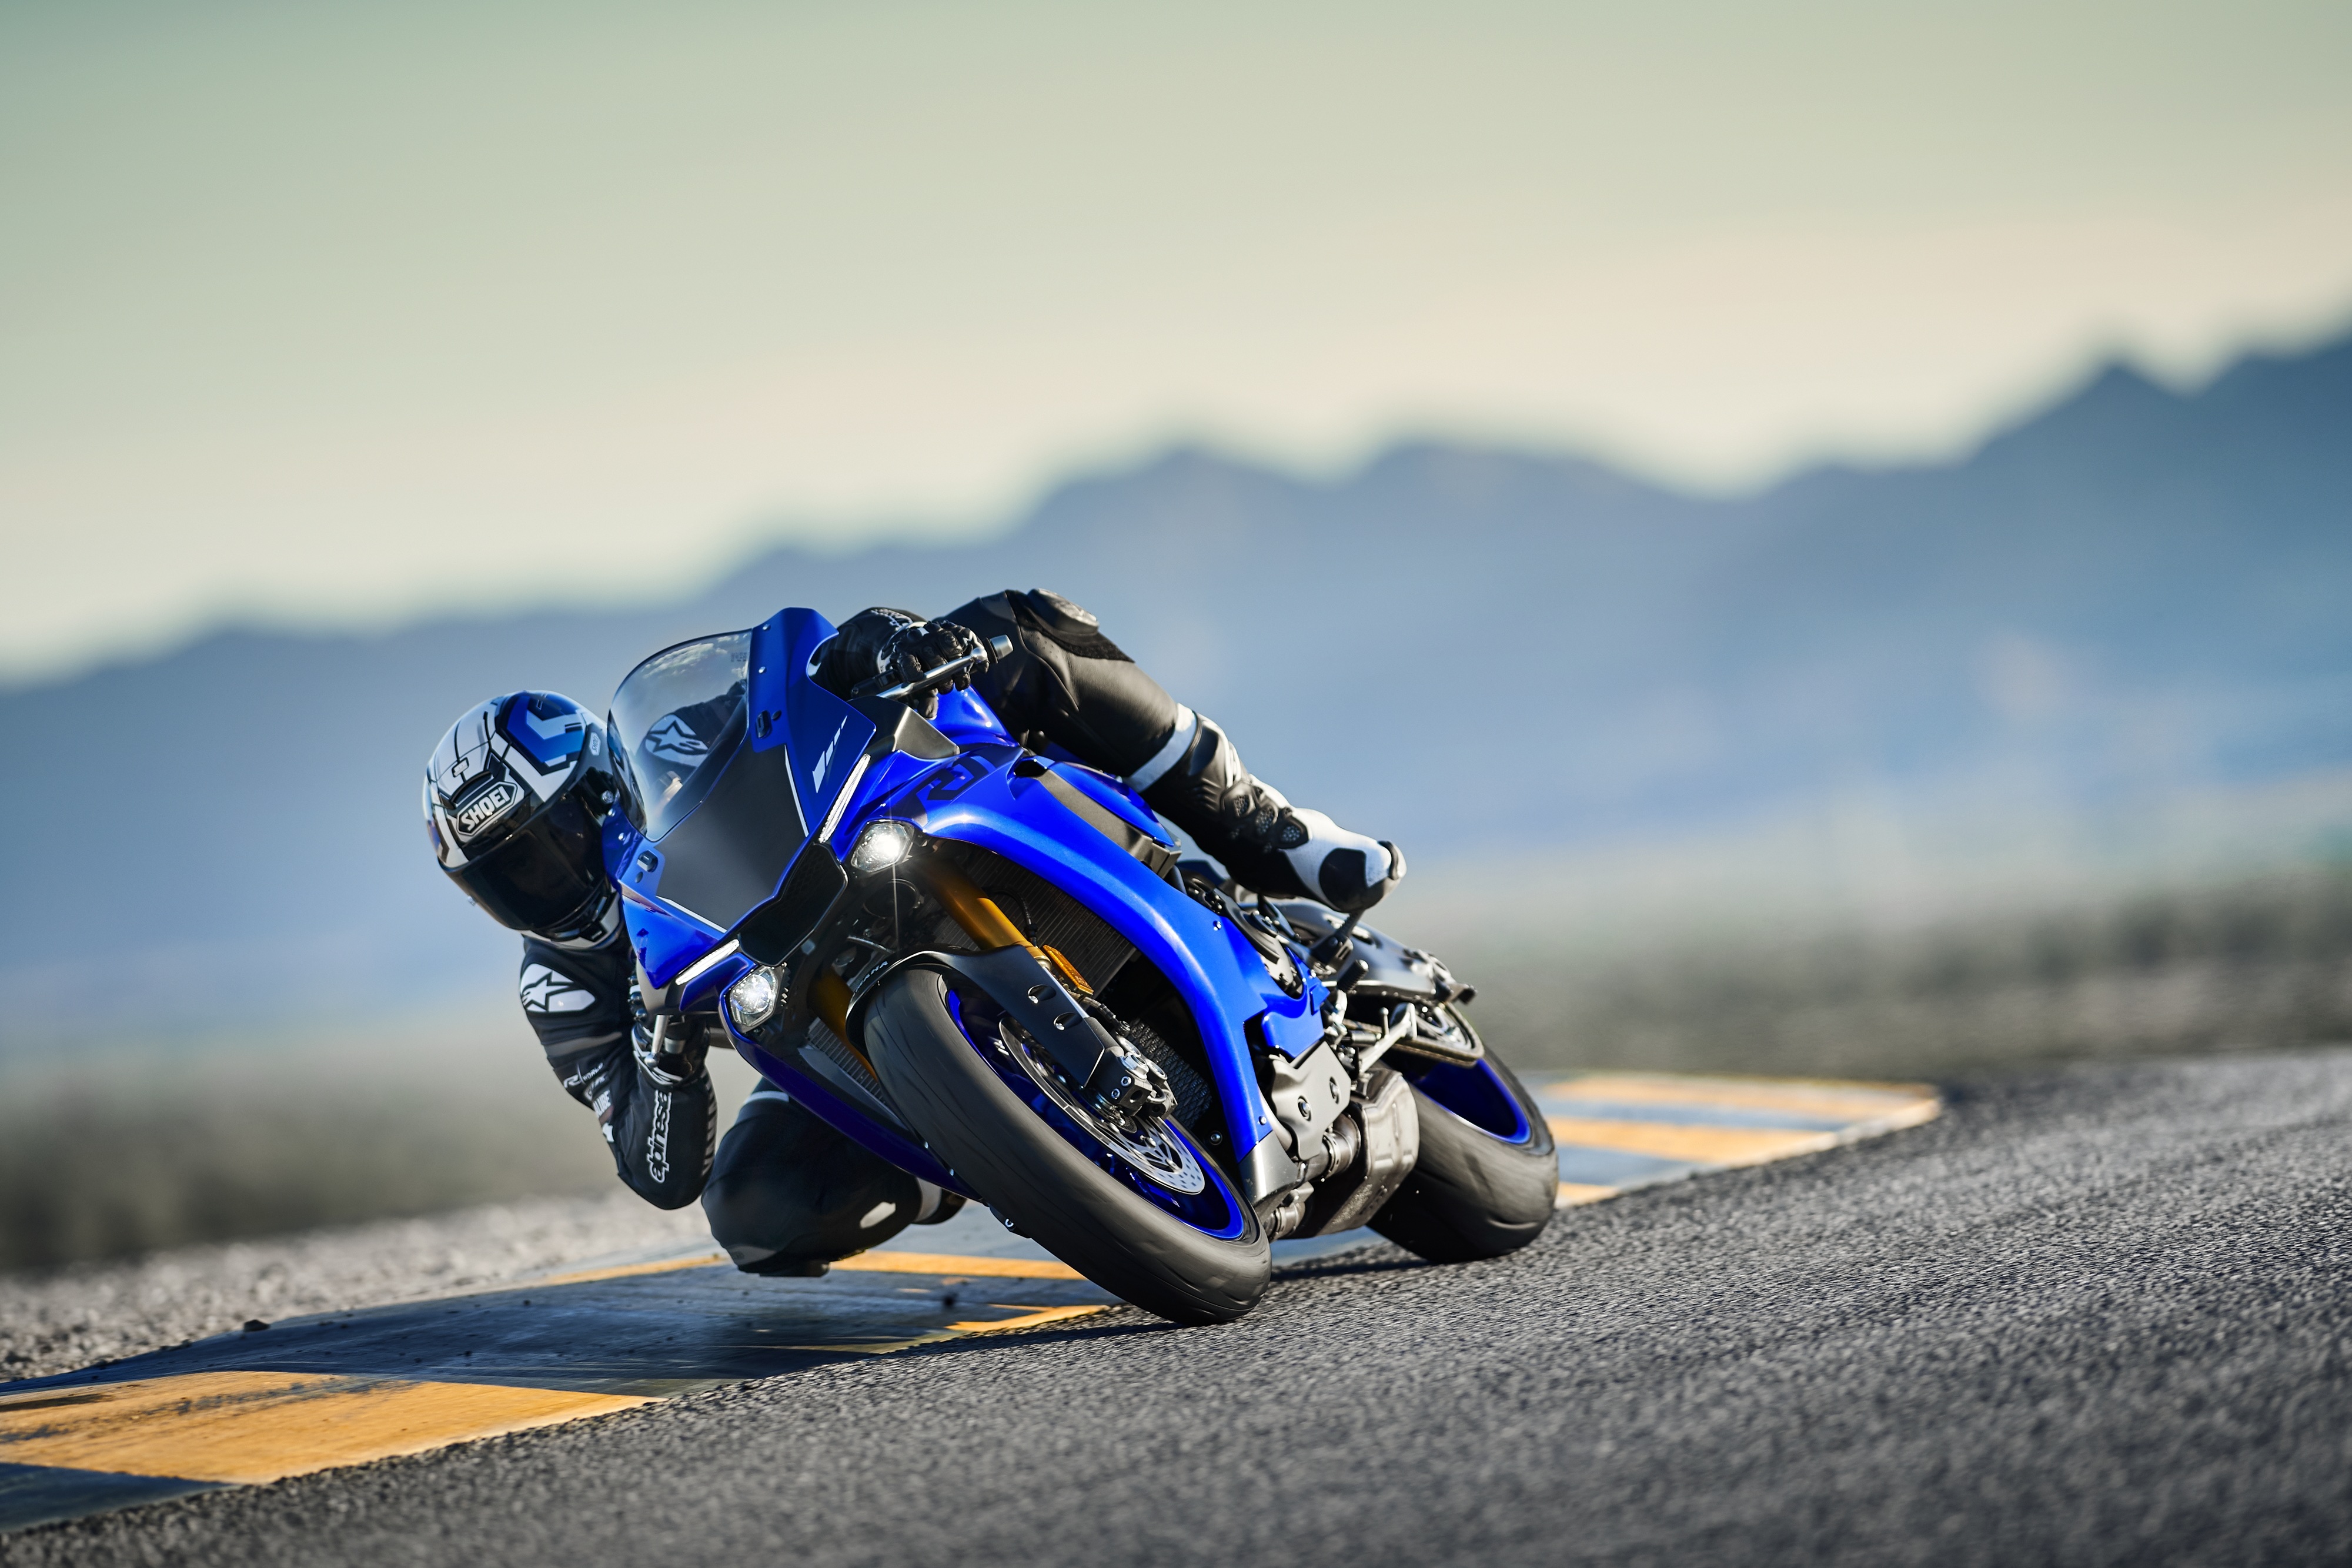 Updates to Yamaha YZF-R1 and YZF-R1M revealed at EICMA